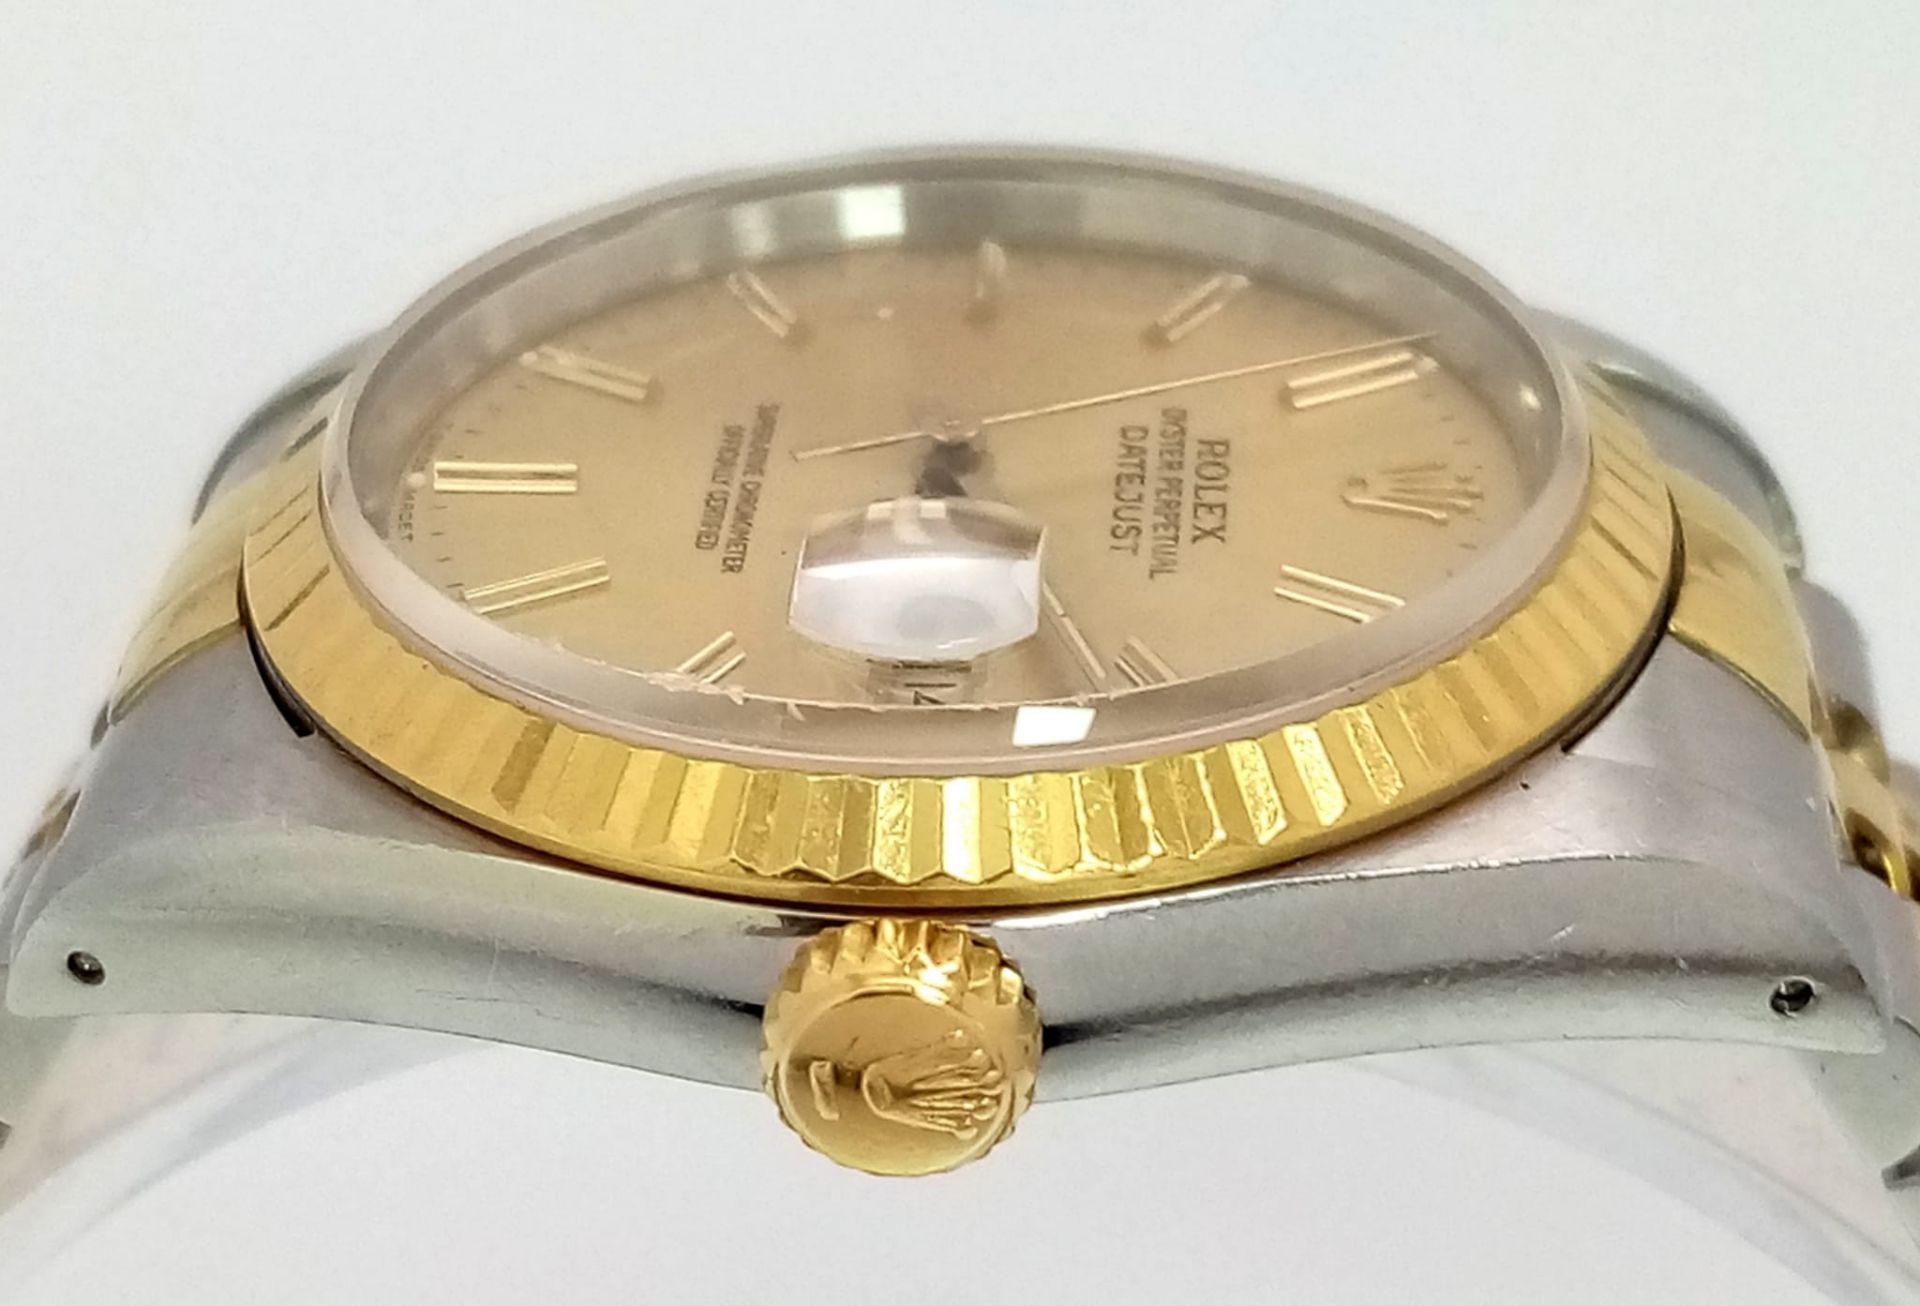 A Rolex Oyster Perpetual Datejust Gents Watch. Bi-metal strap and case - 36mm. Gold tone dial. - Image 4 of 5